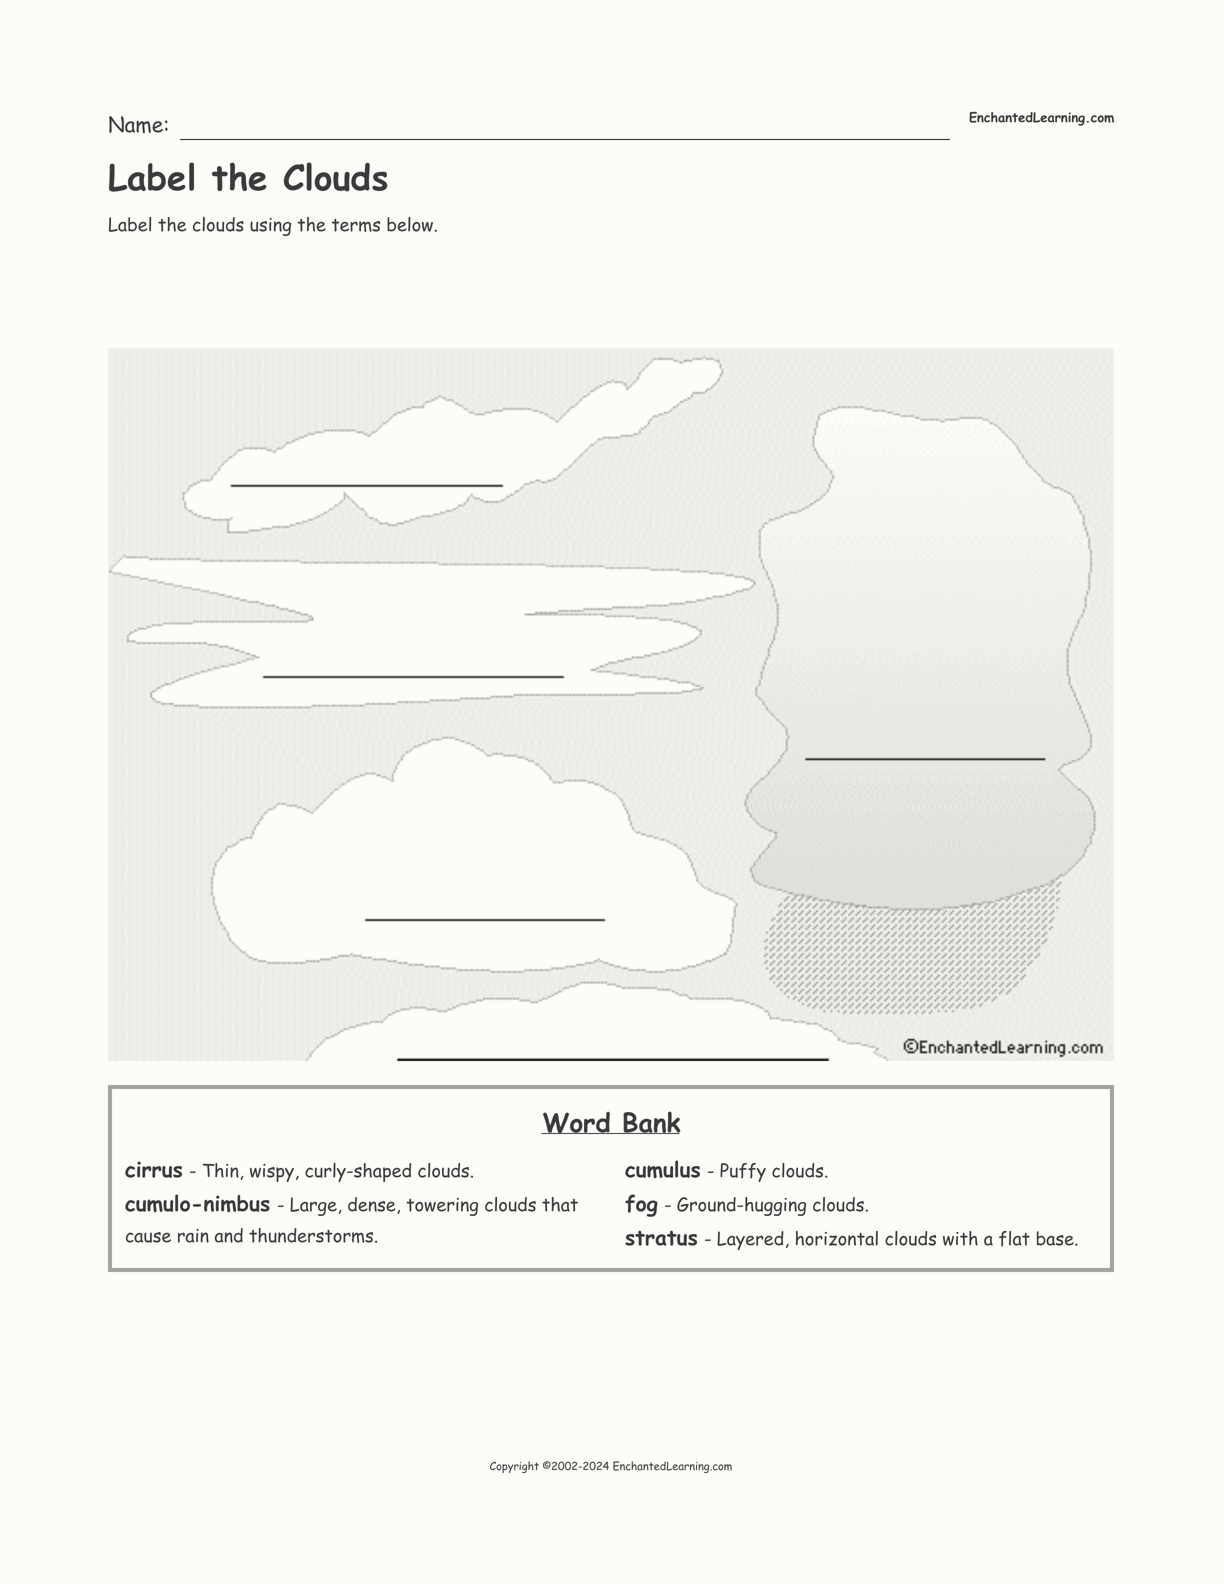 Label the Clouds interactive worksheet page 1